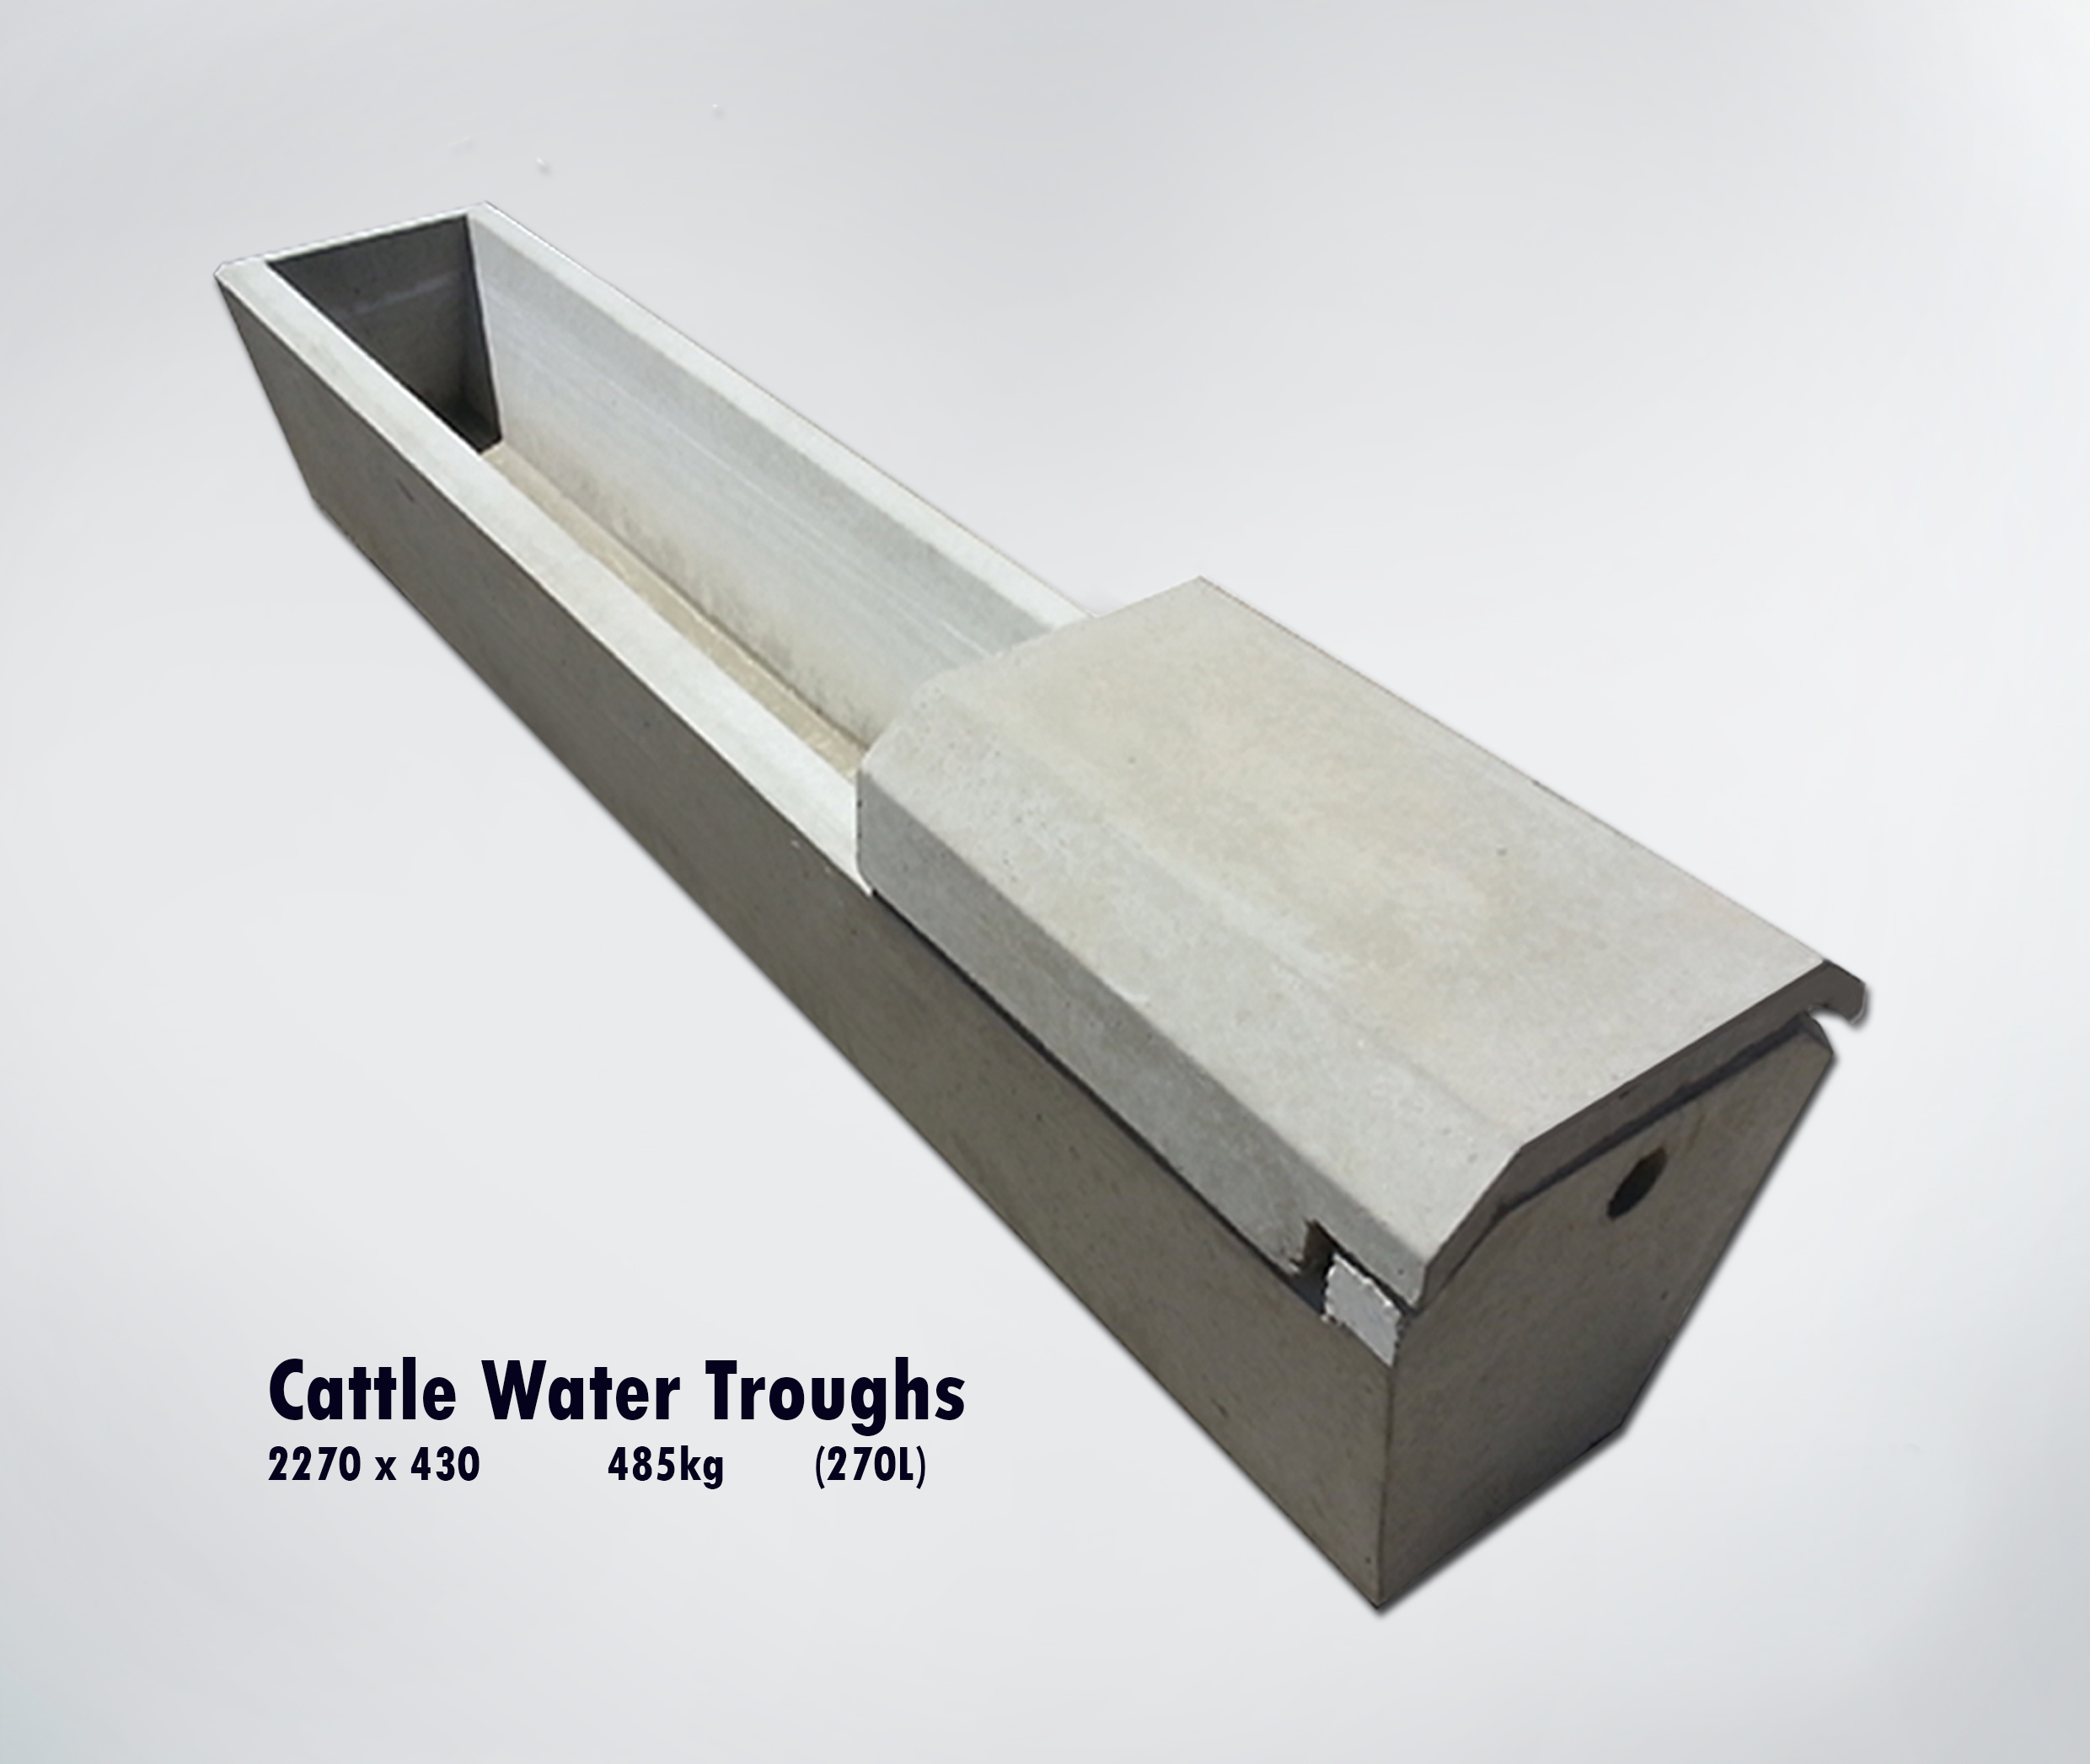 Cattle Water Troughs